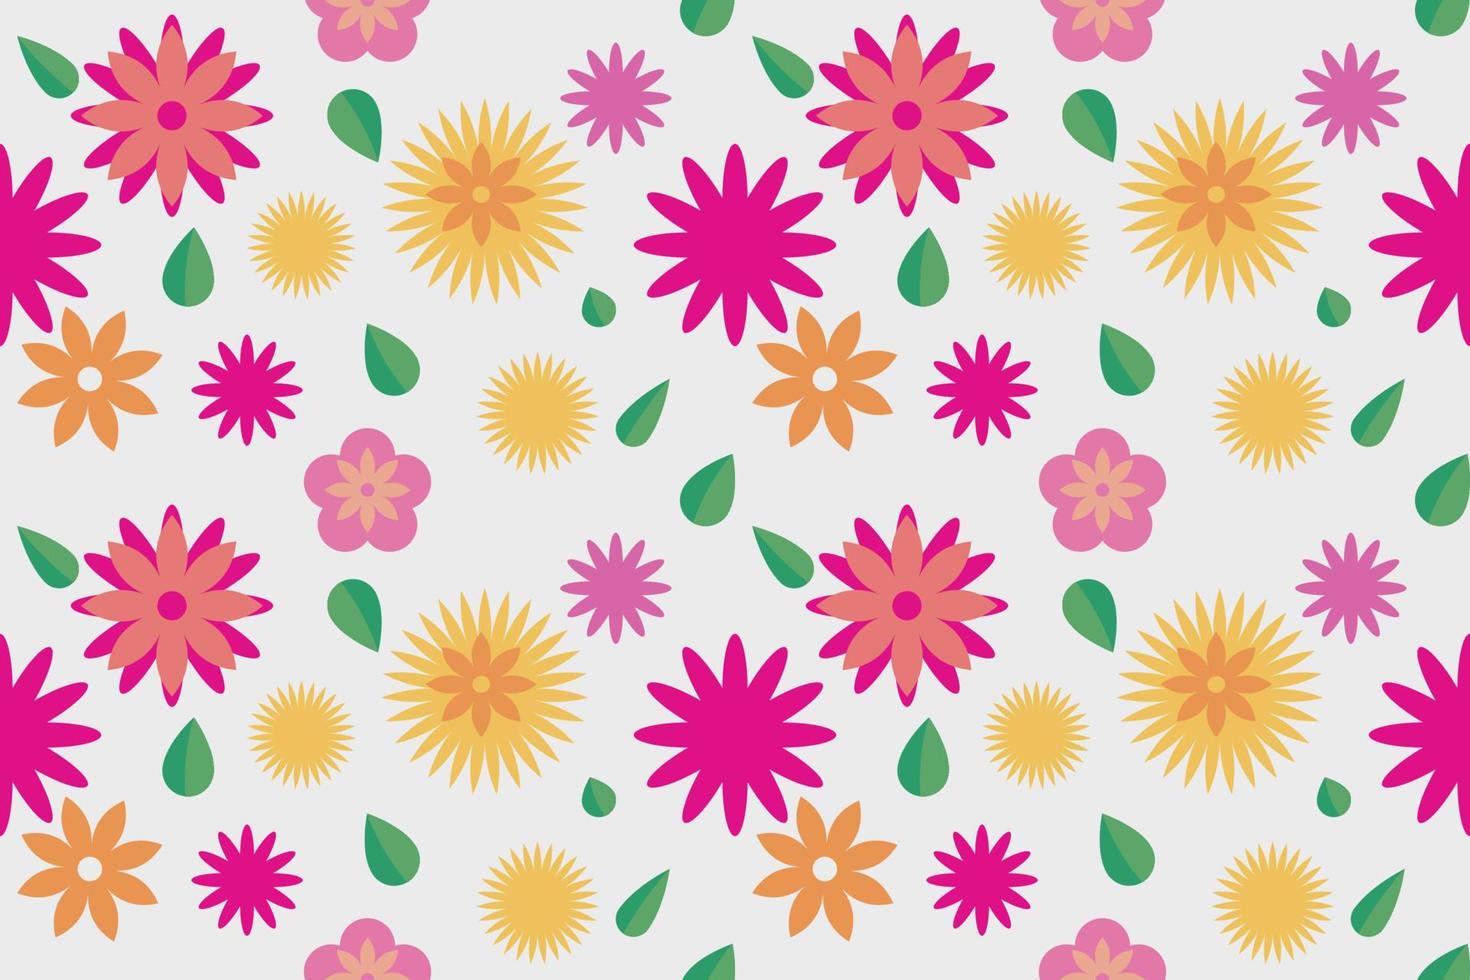 Colorful flower background, seamless pattern vector illustration.